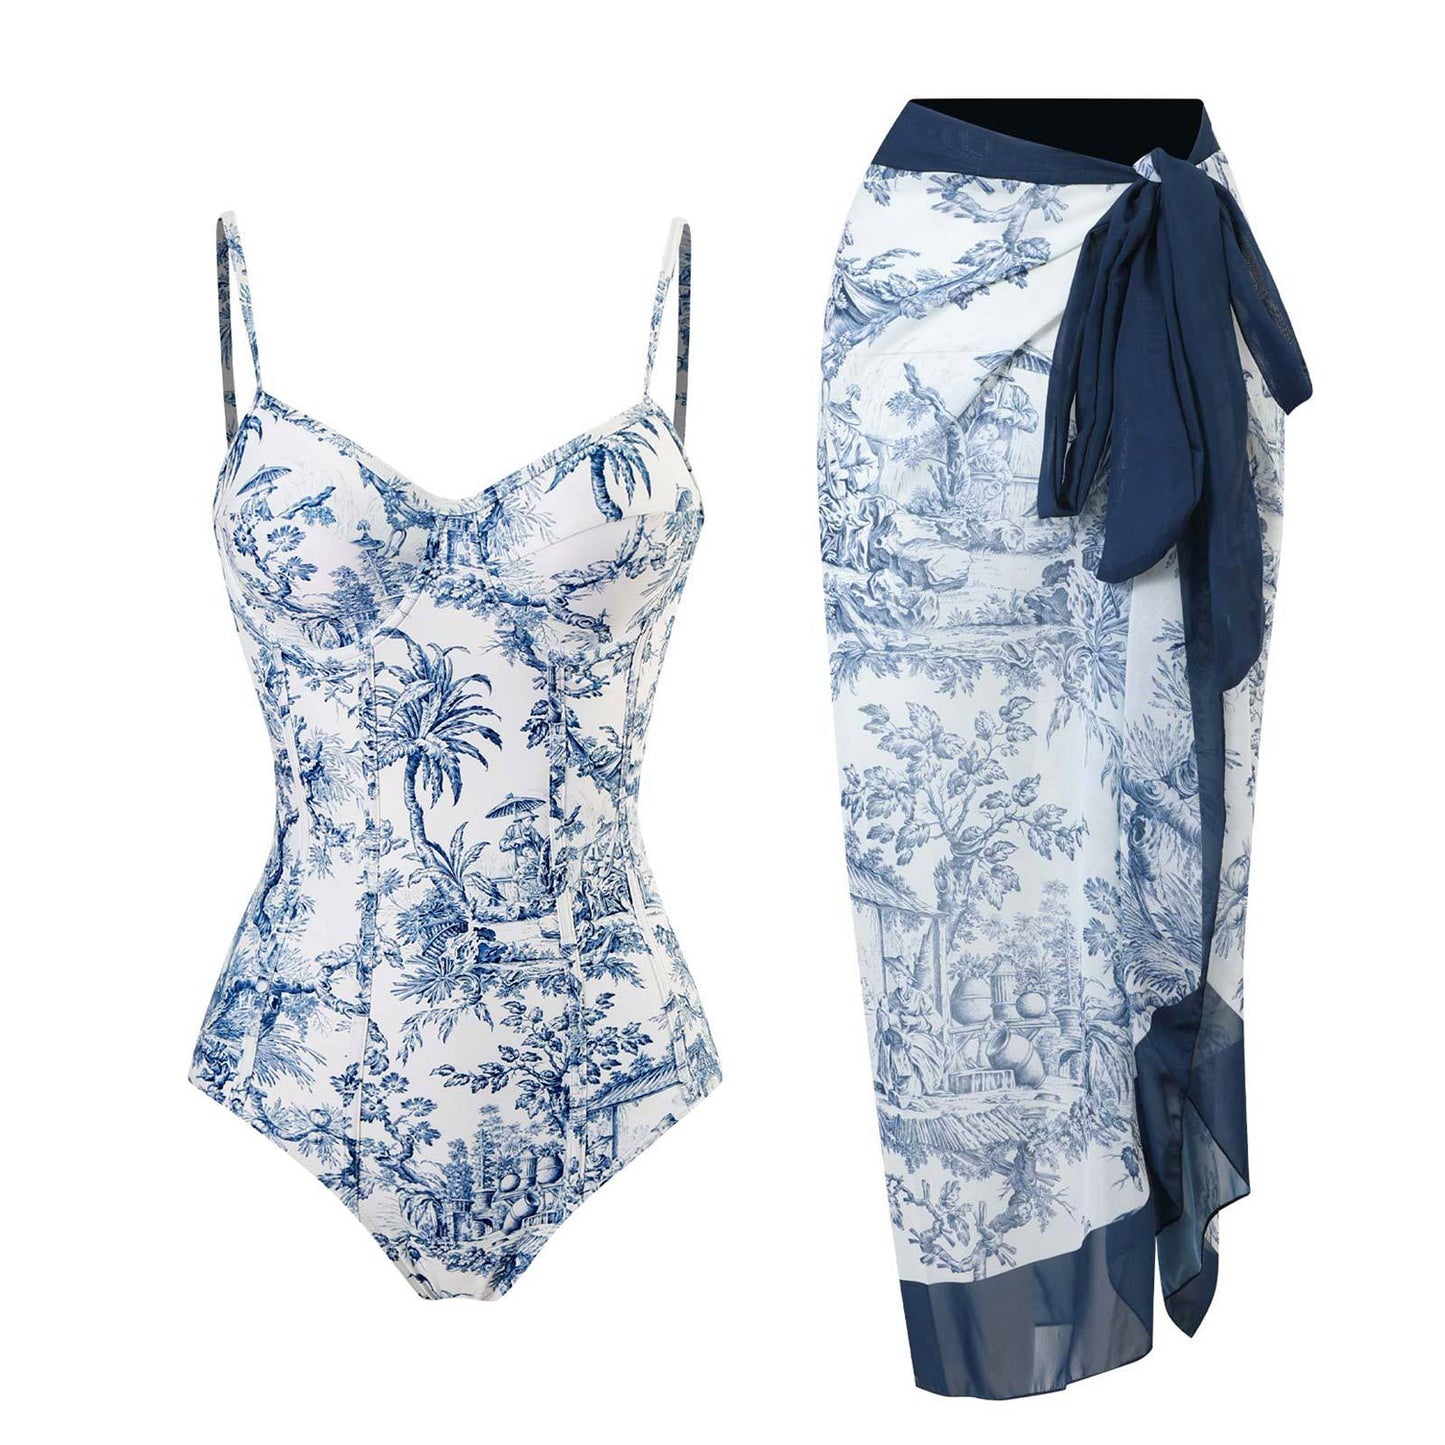 Muse De Palm Beach - One Piece Swimsuit Set - With Matching Cover Up